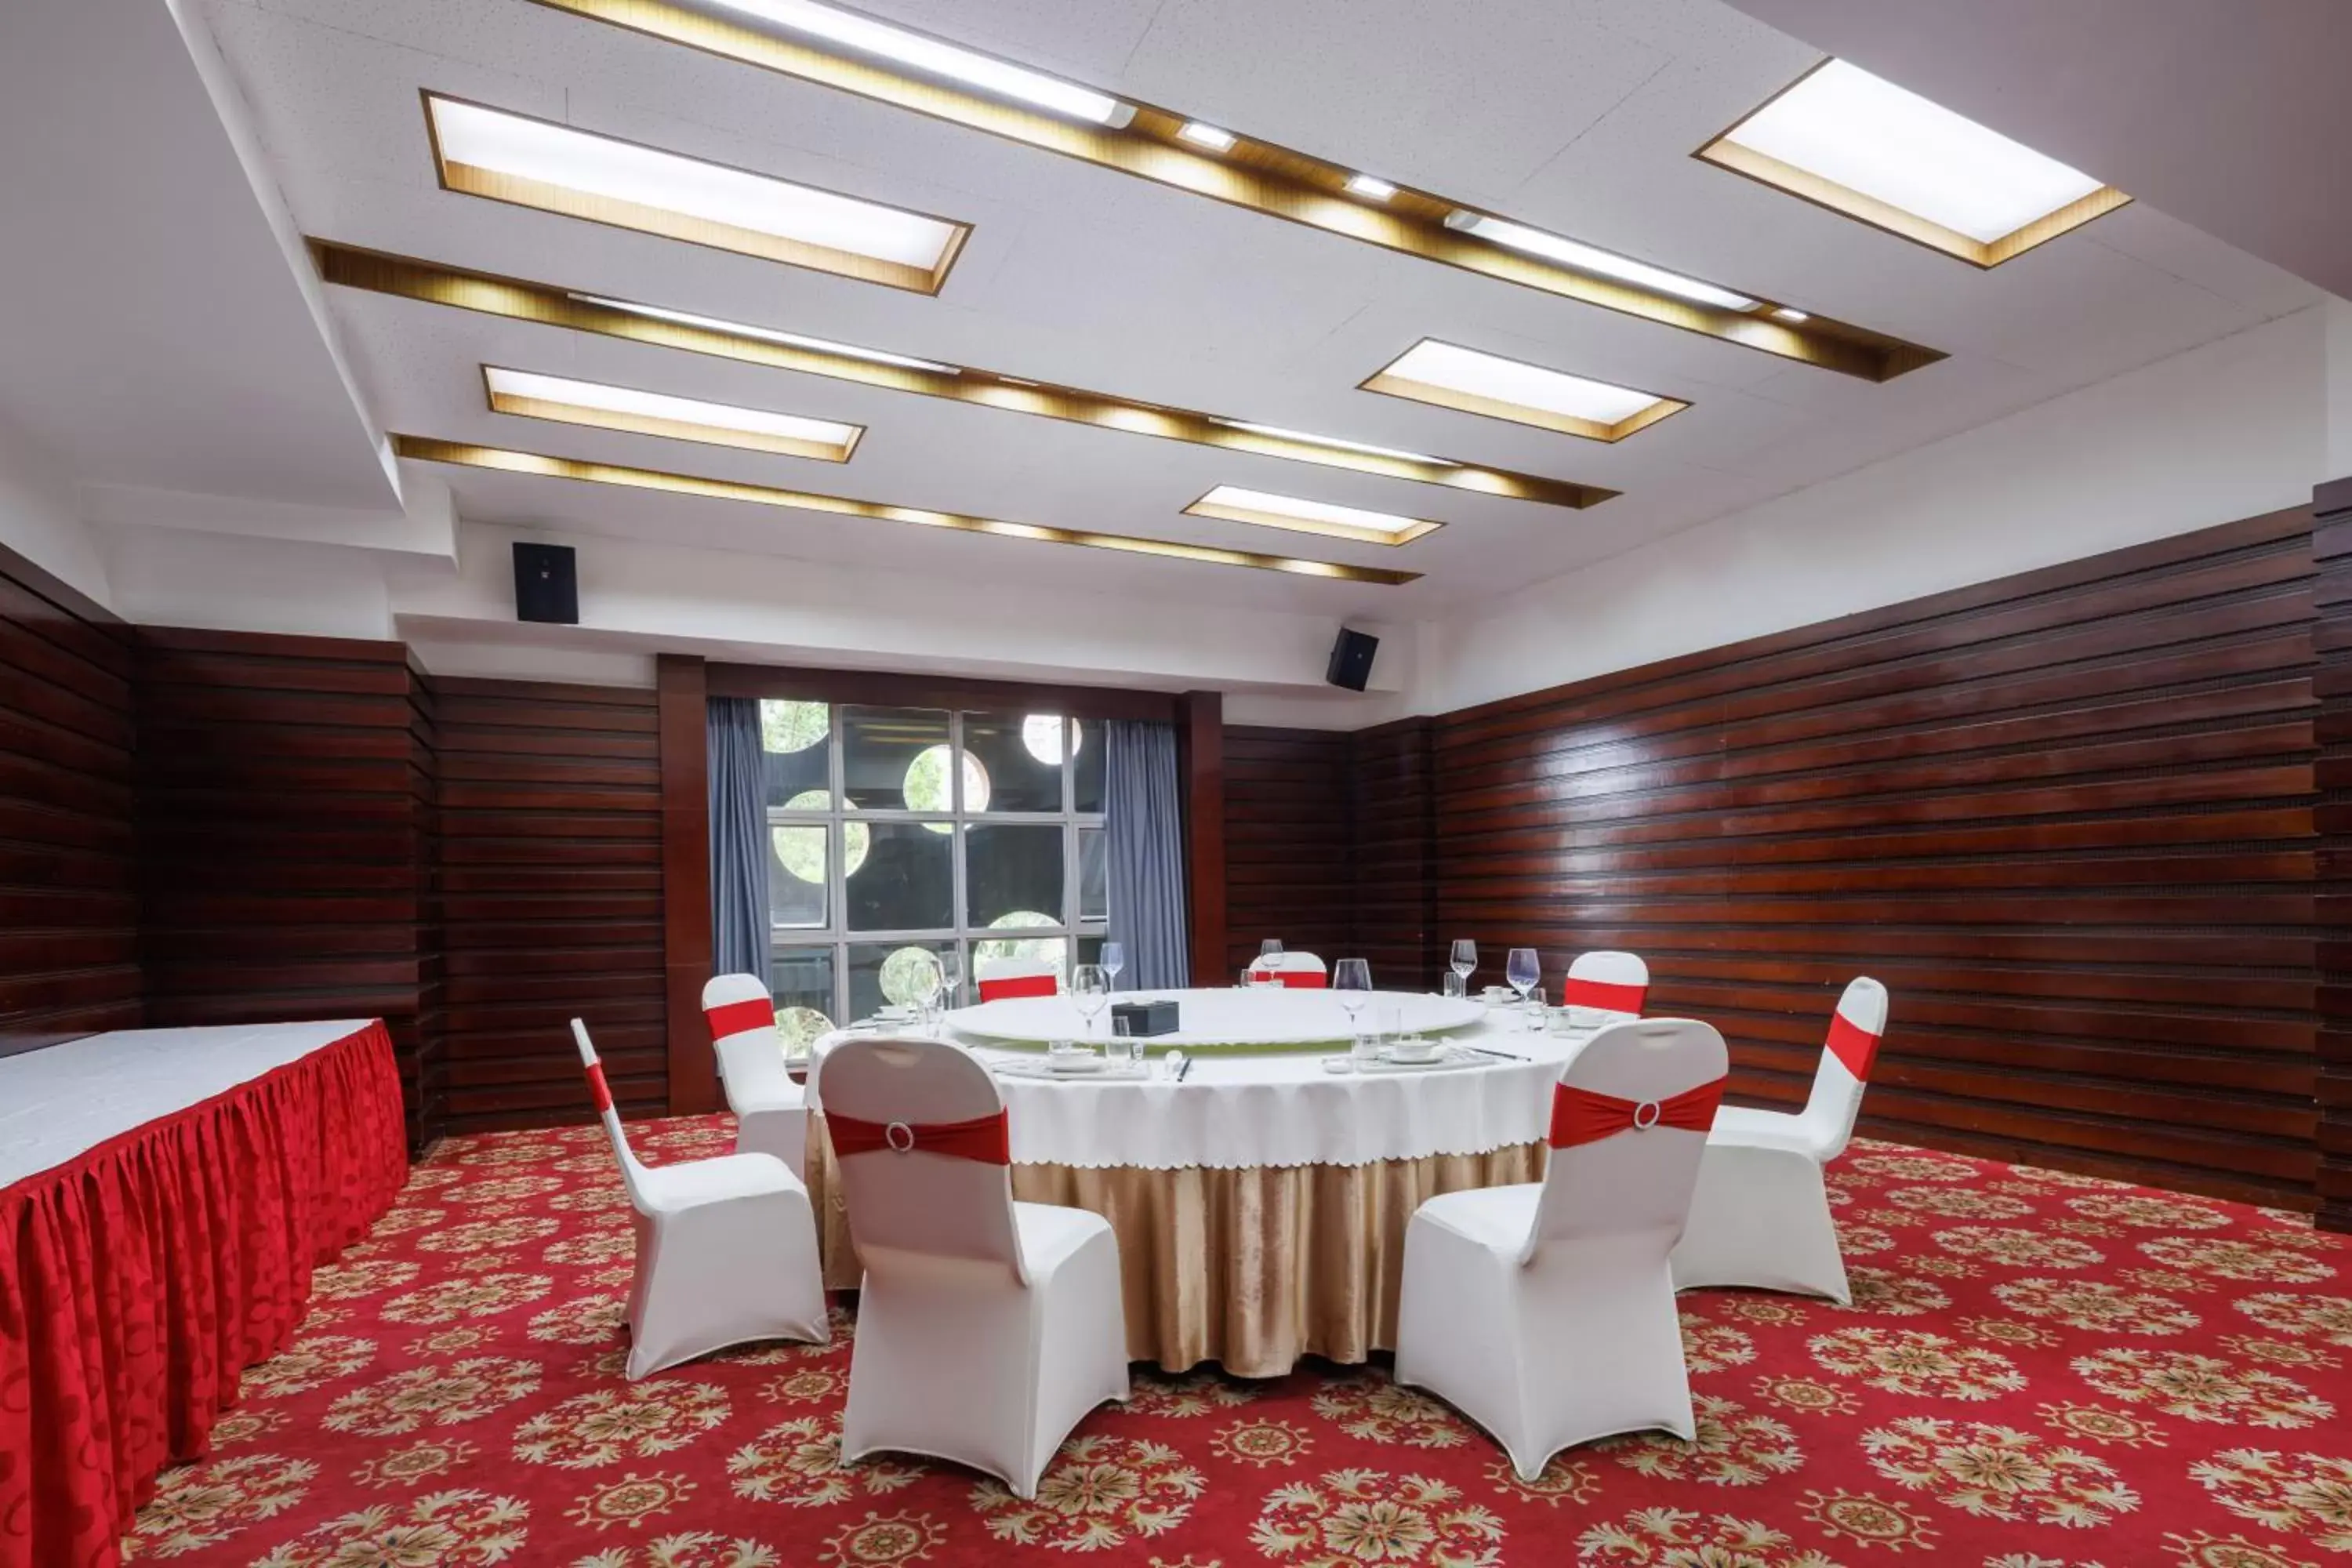 Restaurant/places to eat, Banquet Facilities in Sunflower Hotel & Residence, Shenzhen